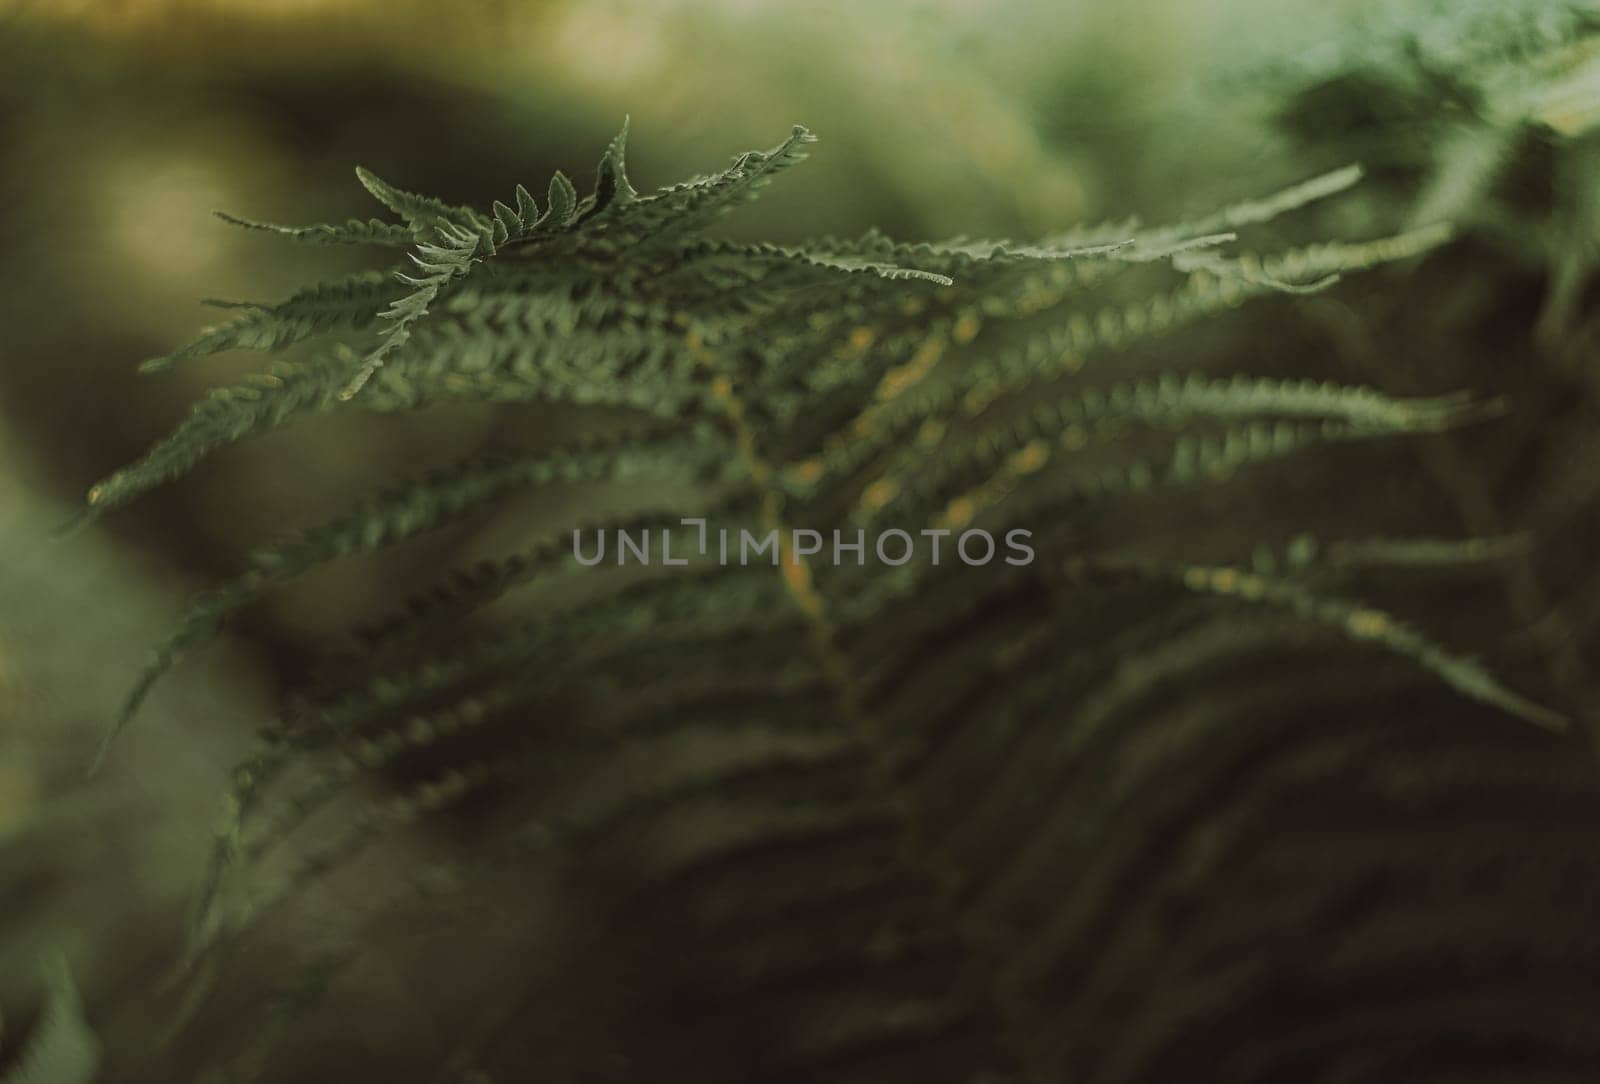 Background from green fern. Focus on the tip of the leaf, the rest is blurry.